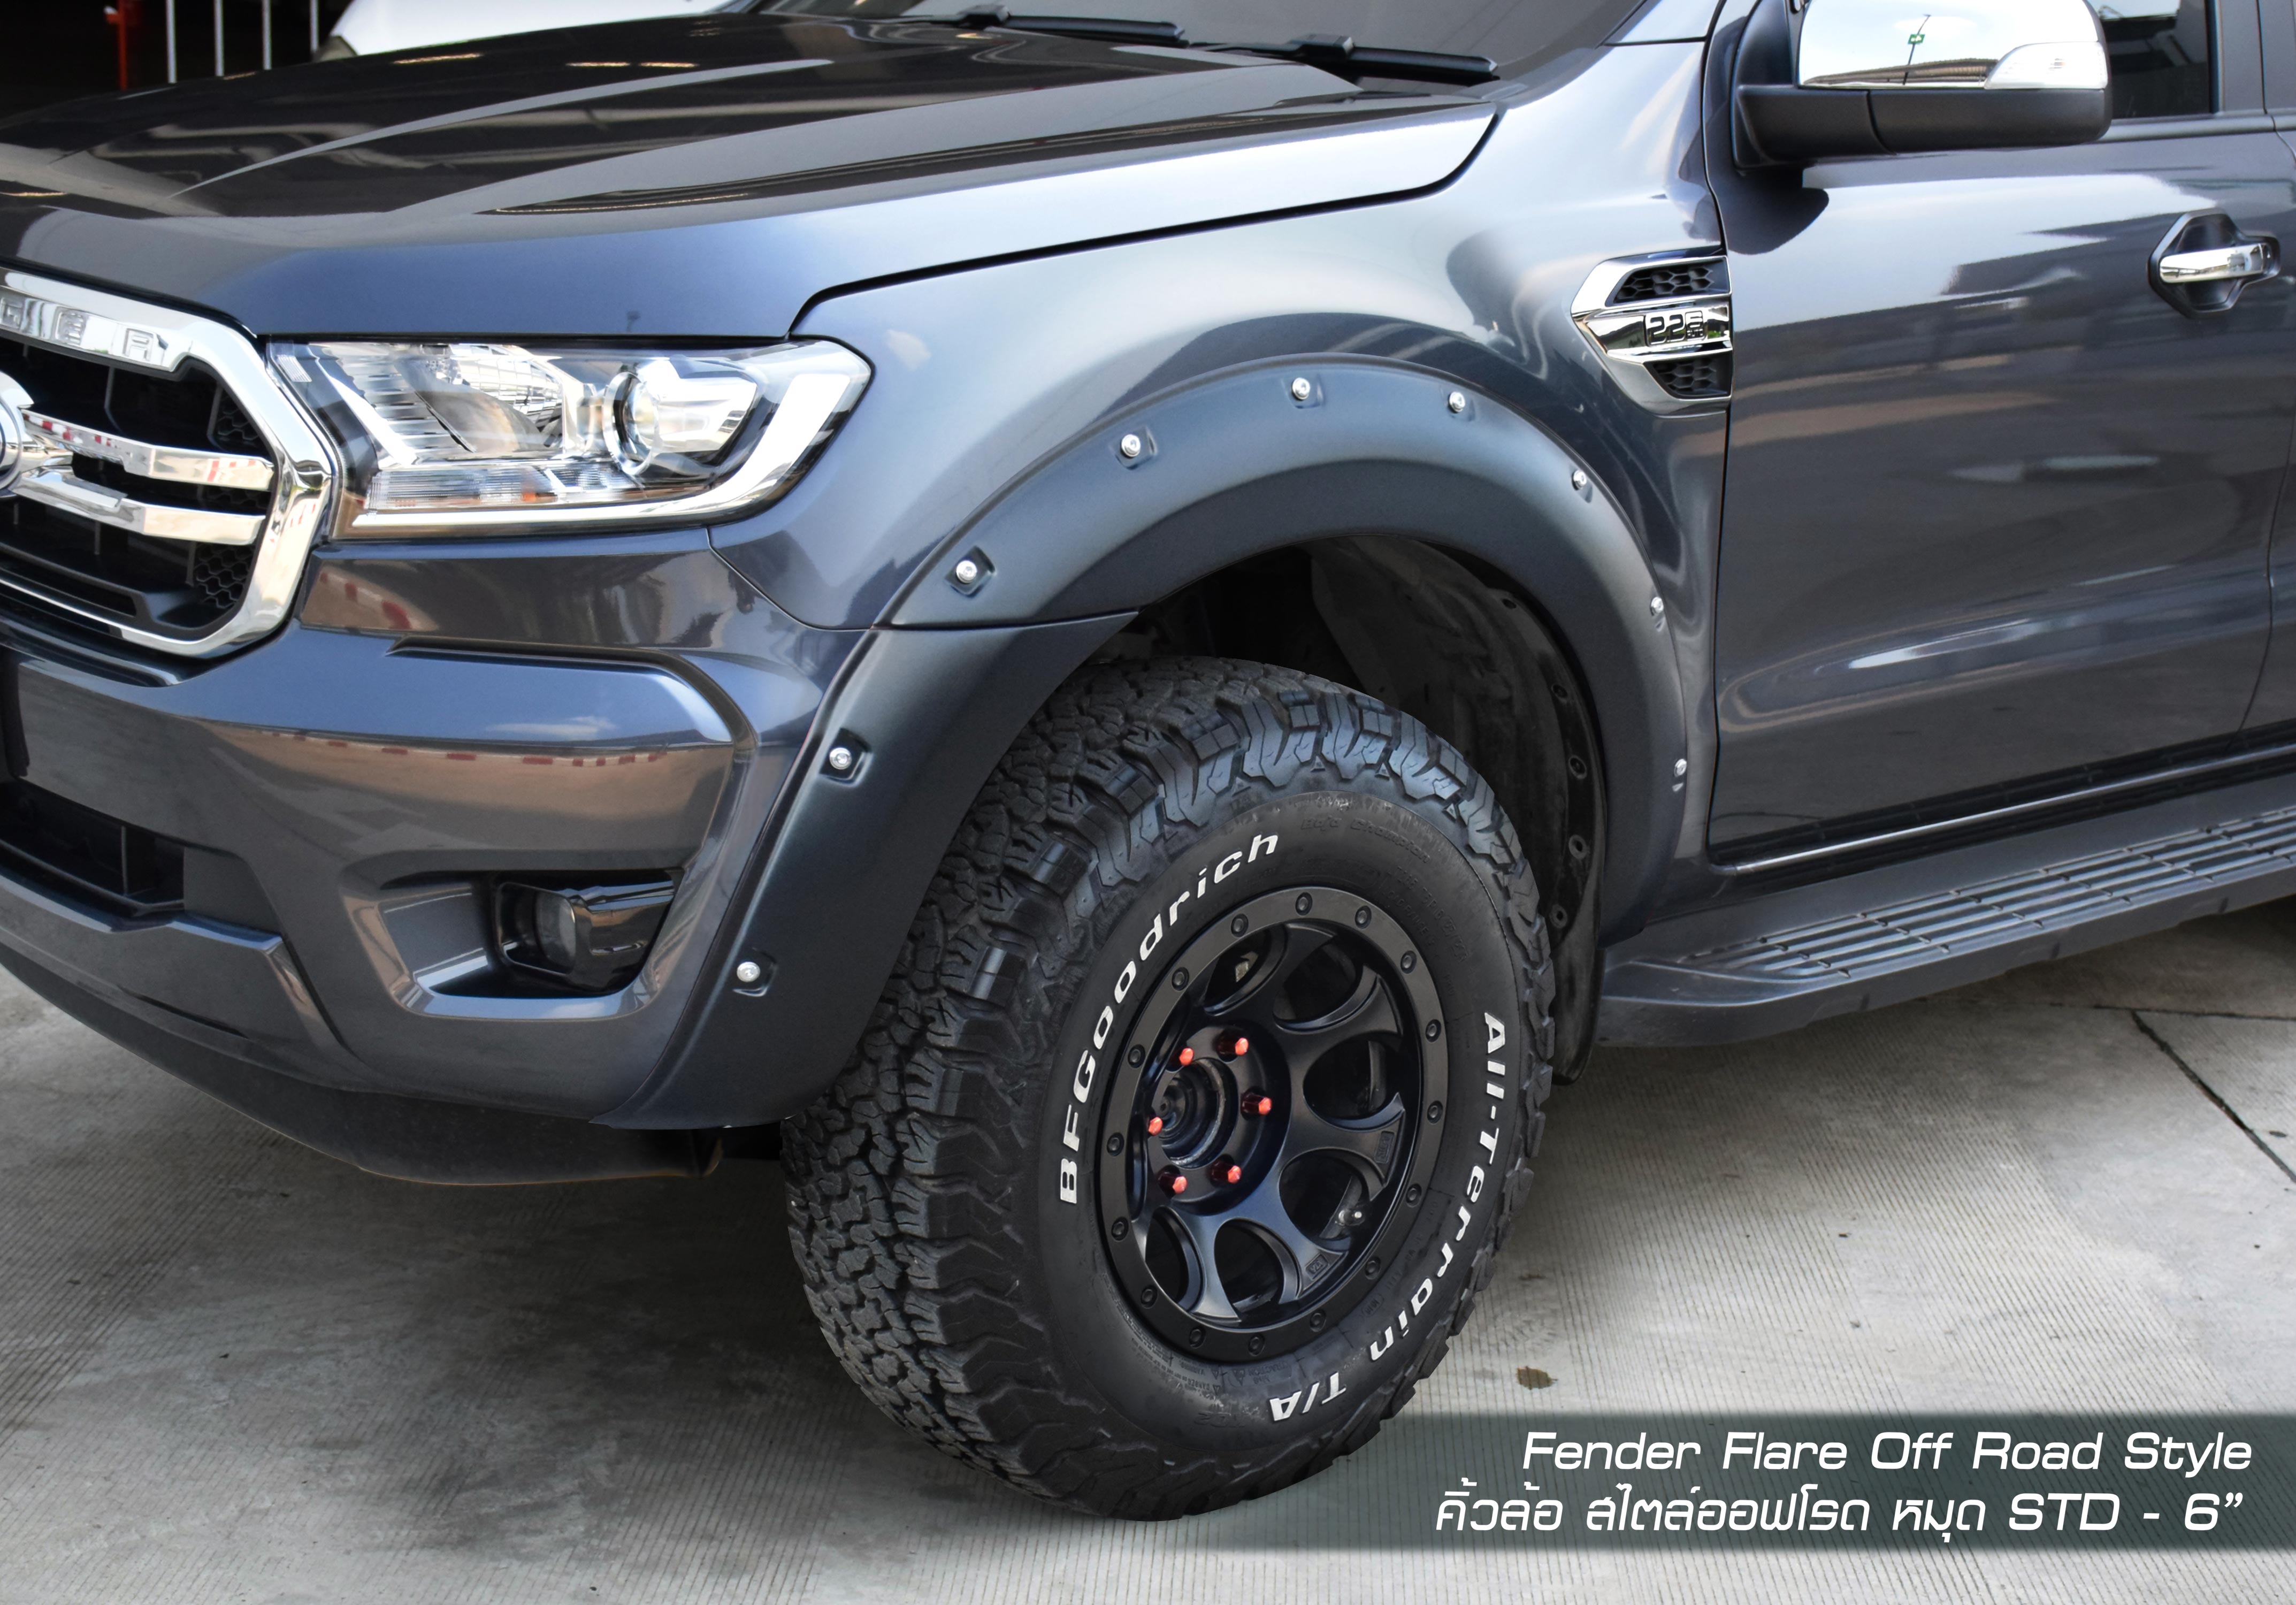 Fender Flares Offroad Style 6'' Ford Ranger